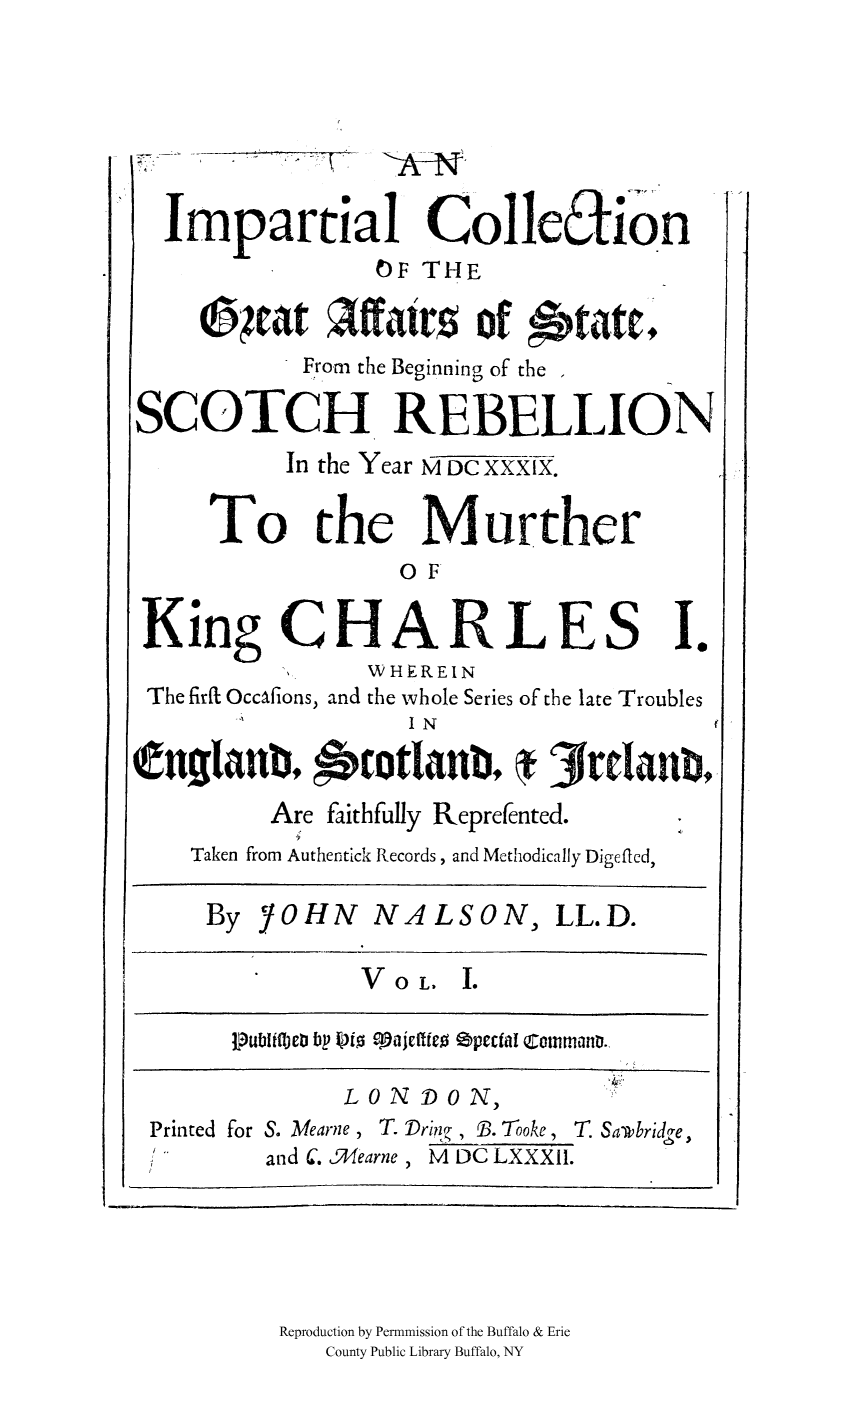 handle is hein.cow/graffscot0001 and id is 1 raw text is: Impartial ColleEtion
OF THE
04at Aftais Of ttrftl
From the Beginning of the -
SCOTCH REBELLION
In the Year M DC XXXIX.
To the Murther
OF
King CHARLES I.
WHEREIN
The firfL OccAfions, and the whole Series of the late Troubles
I N
tiganb9       gtlanb,     3rdlaub,
Are faithfully Reprefented.
Taken from Authentick Records, and Methodically Digefled,
By YOHN NALSON, LL.D.
VoL. I.
Pub~liflet bp 10io c-10je[ffeO epecfal Co0mmanD.,
LO N DO N, )
Printed for S. Mearne , T. Dri?  , B. Tooke, T. Samibridge
and C. 4earne, M DC LXXXII.

Reproduction by Permnmission of the Buffalo & Erie
County Public Library Buffalo, NY


